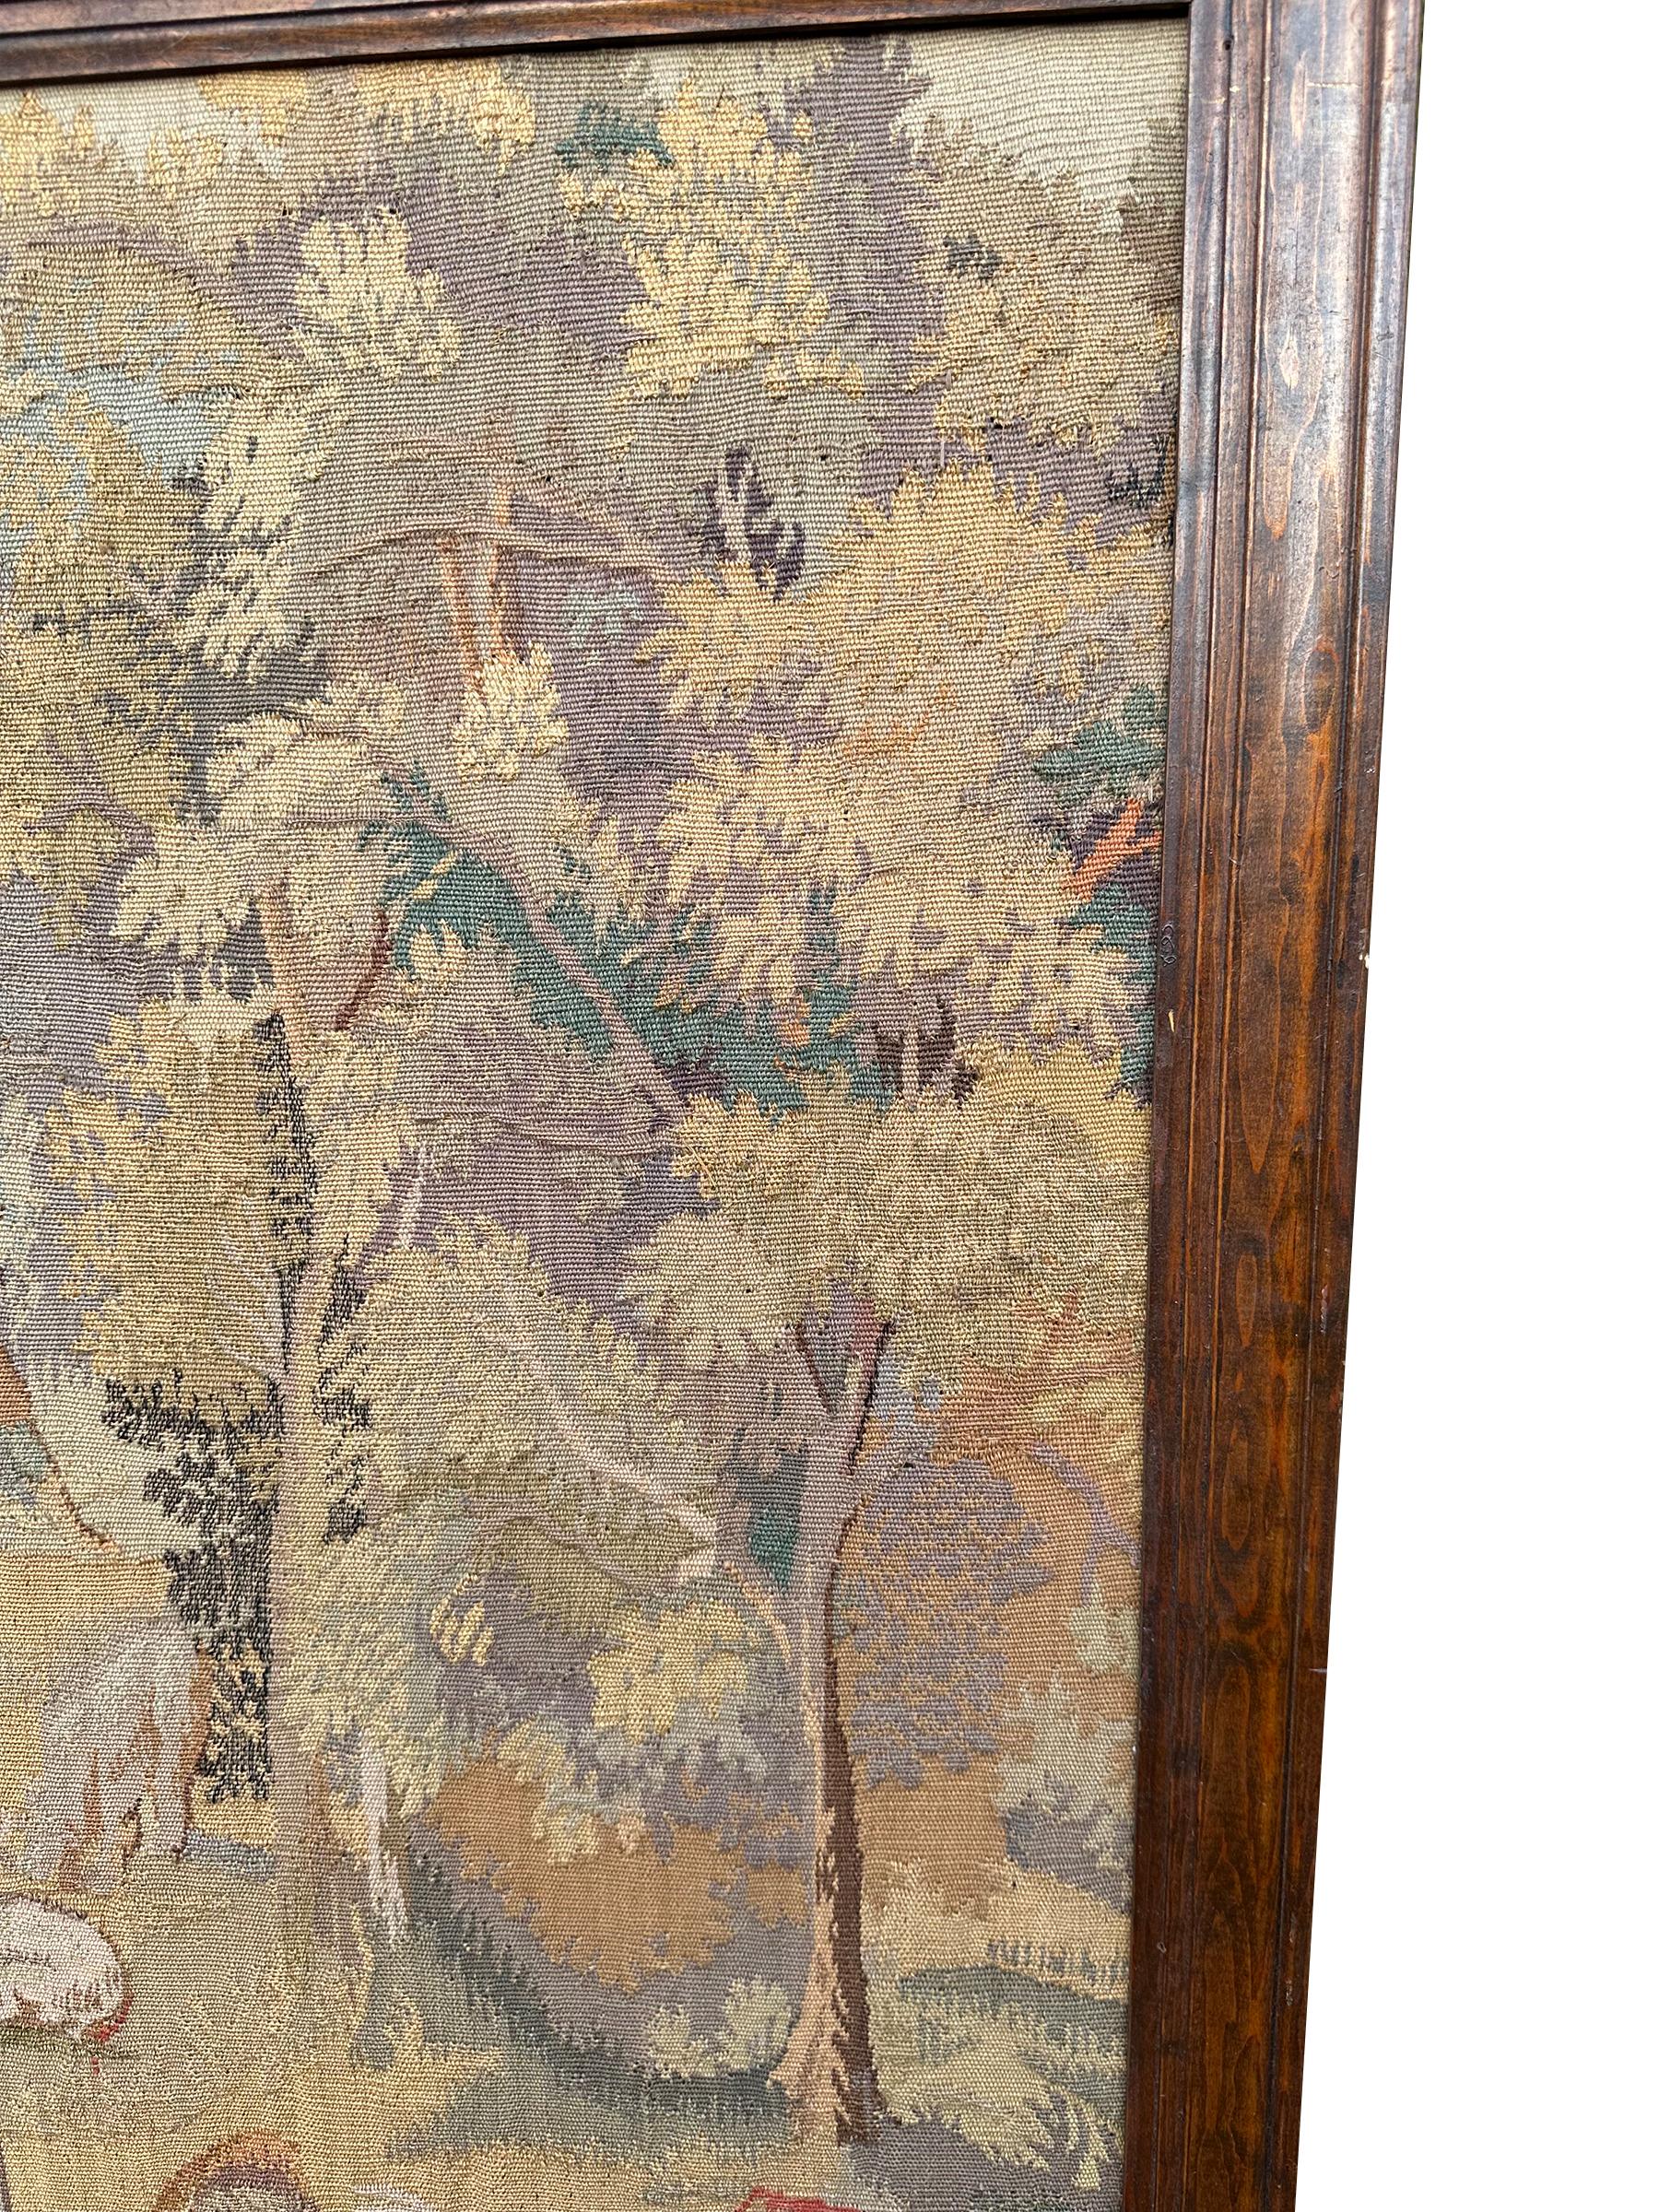 1920 Antique French Tapestry Wool & Silk Village Scene Framed 3x4 102cm x 122cm In Good Condition For Sale In New York, NY